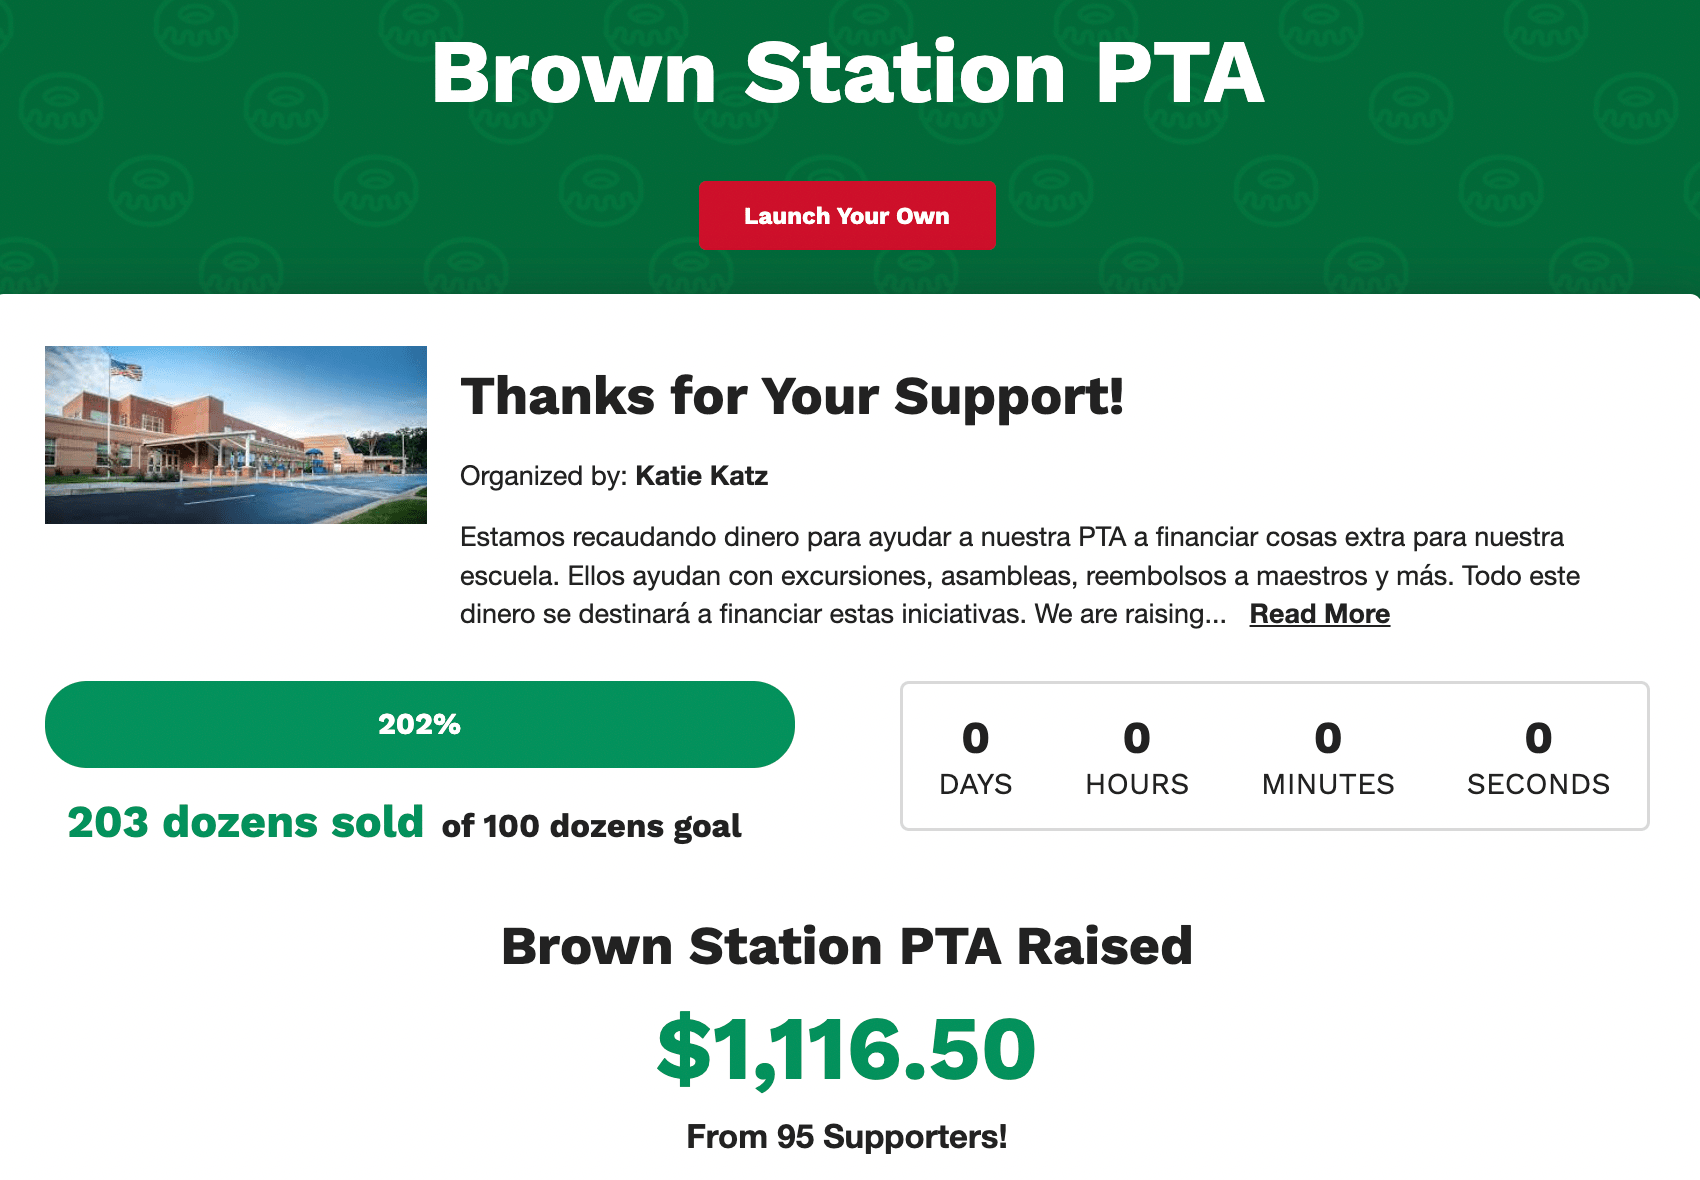 Brown Station PTA's Digital Dozens Fundraising Campaign Page